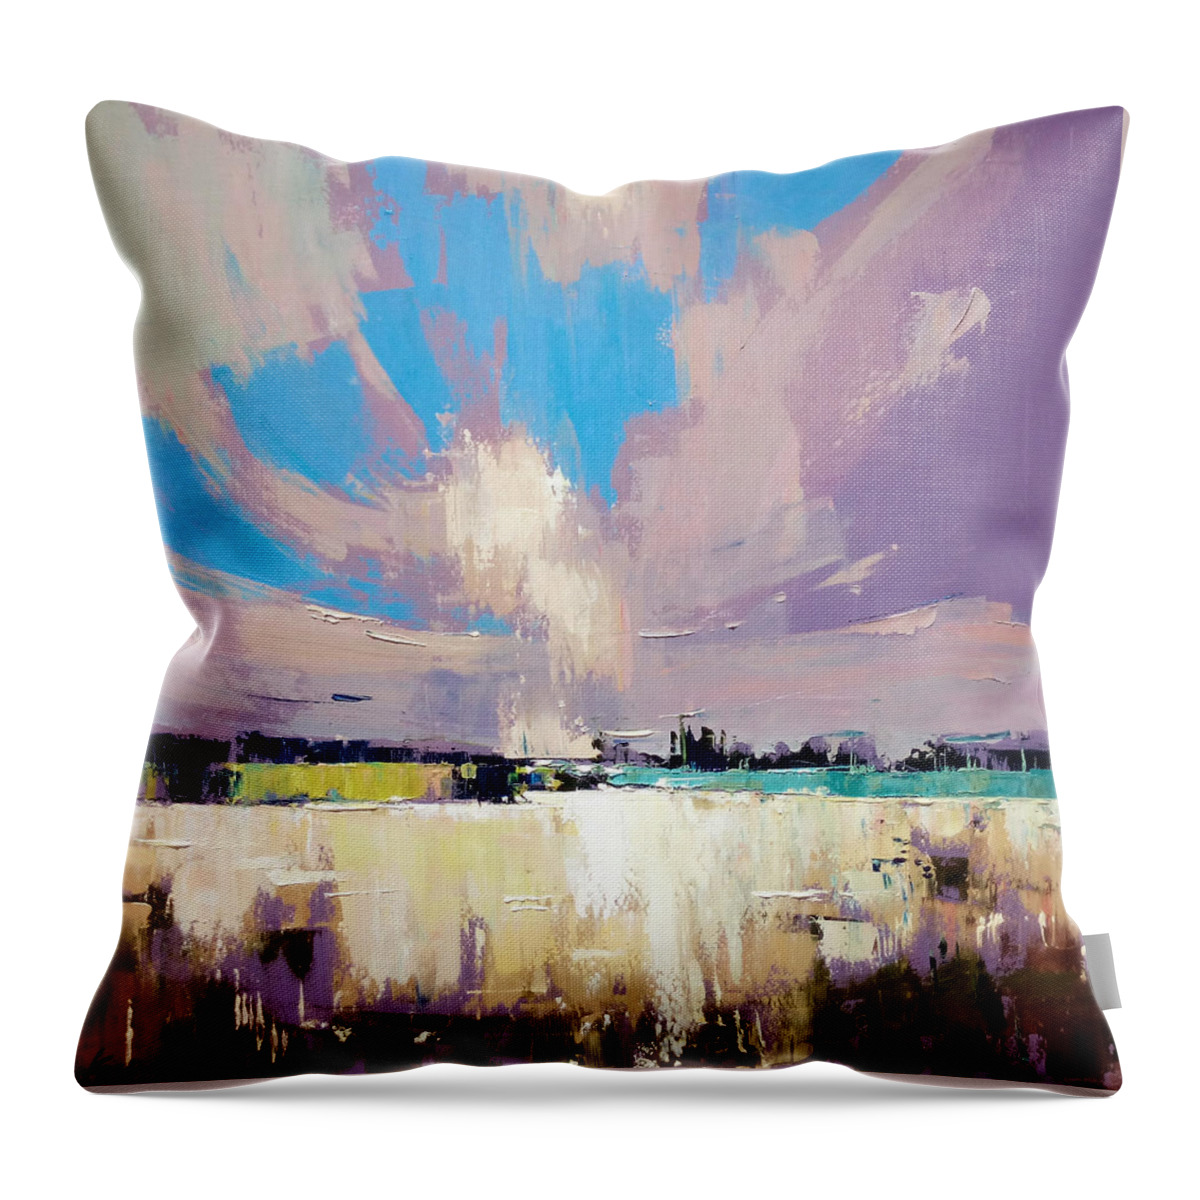 Lost In The Daisies Throw Pillow featuring the painting Lost in the daisies by Anastasija Kraineva